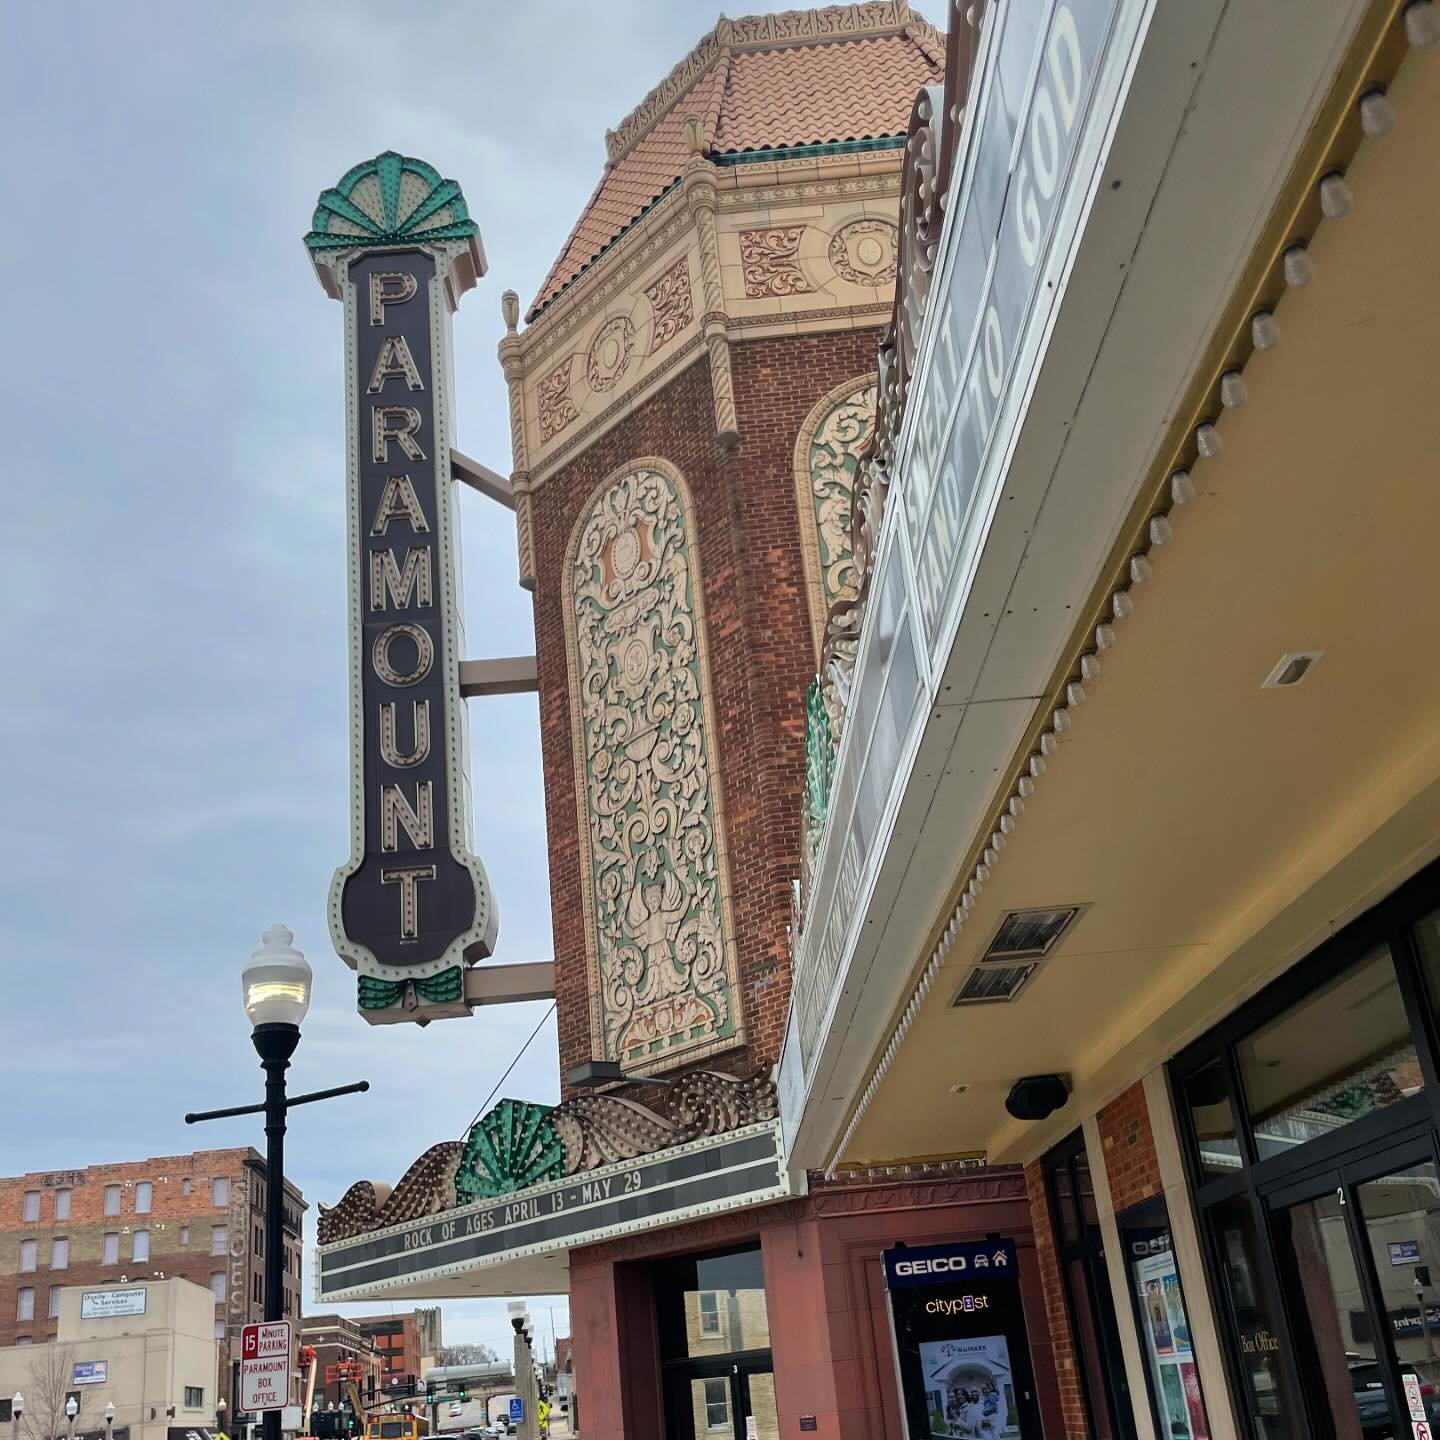 Come for the pottery, then make a night of it in Aurora! 

The Paramount Theater will be showing Beautiful: the Carole King Musical. The Paramount is a treasure, from the architecture to the Broadway-caliber shows. Follow them @paramountaurora for de